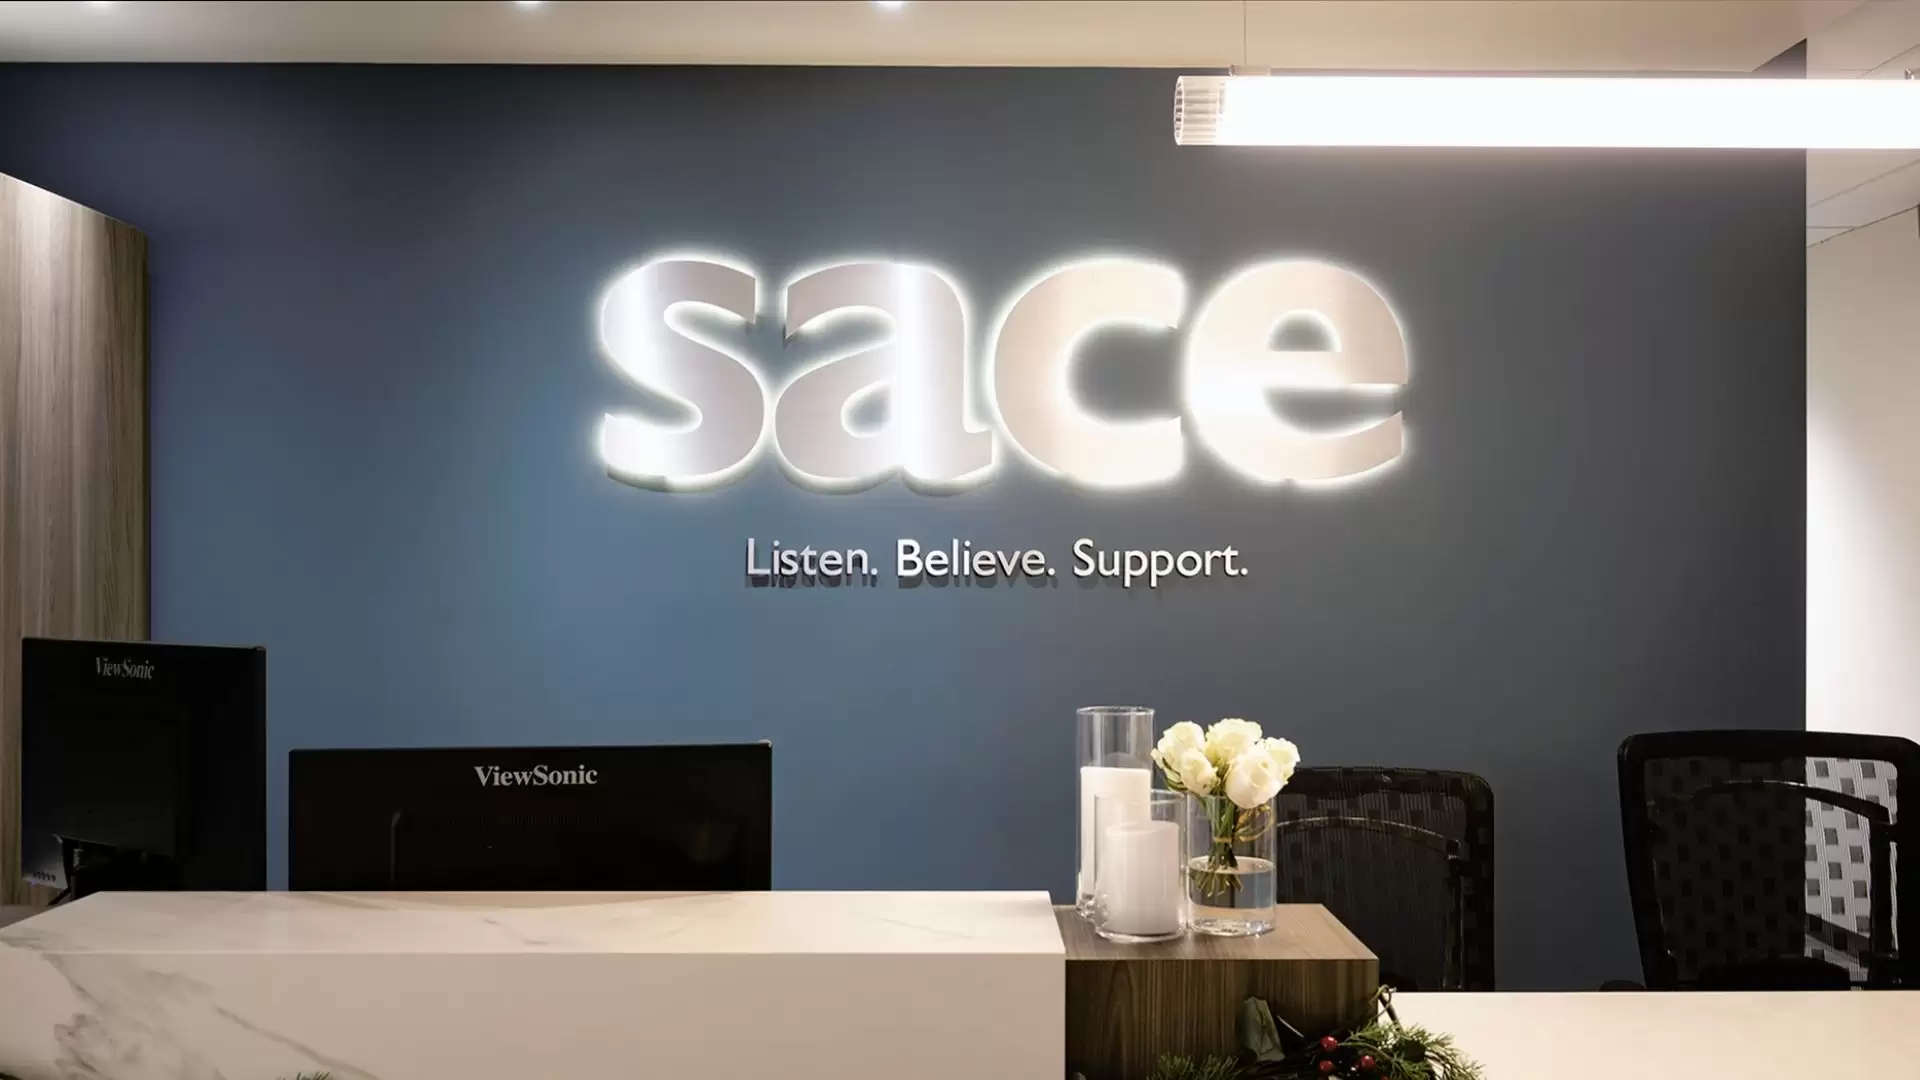 SACE office reception desk with a dark blue painted wall and backlit SACE sign with "Listen. Believe. Support." sign below. Two black monitors and two black office chairs are behind the desk. Candles and white flowers sit on the middle of the desk in glass containers.